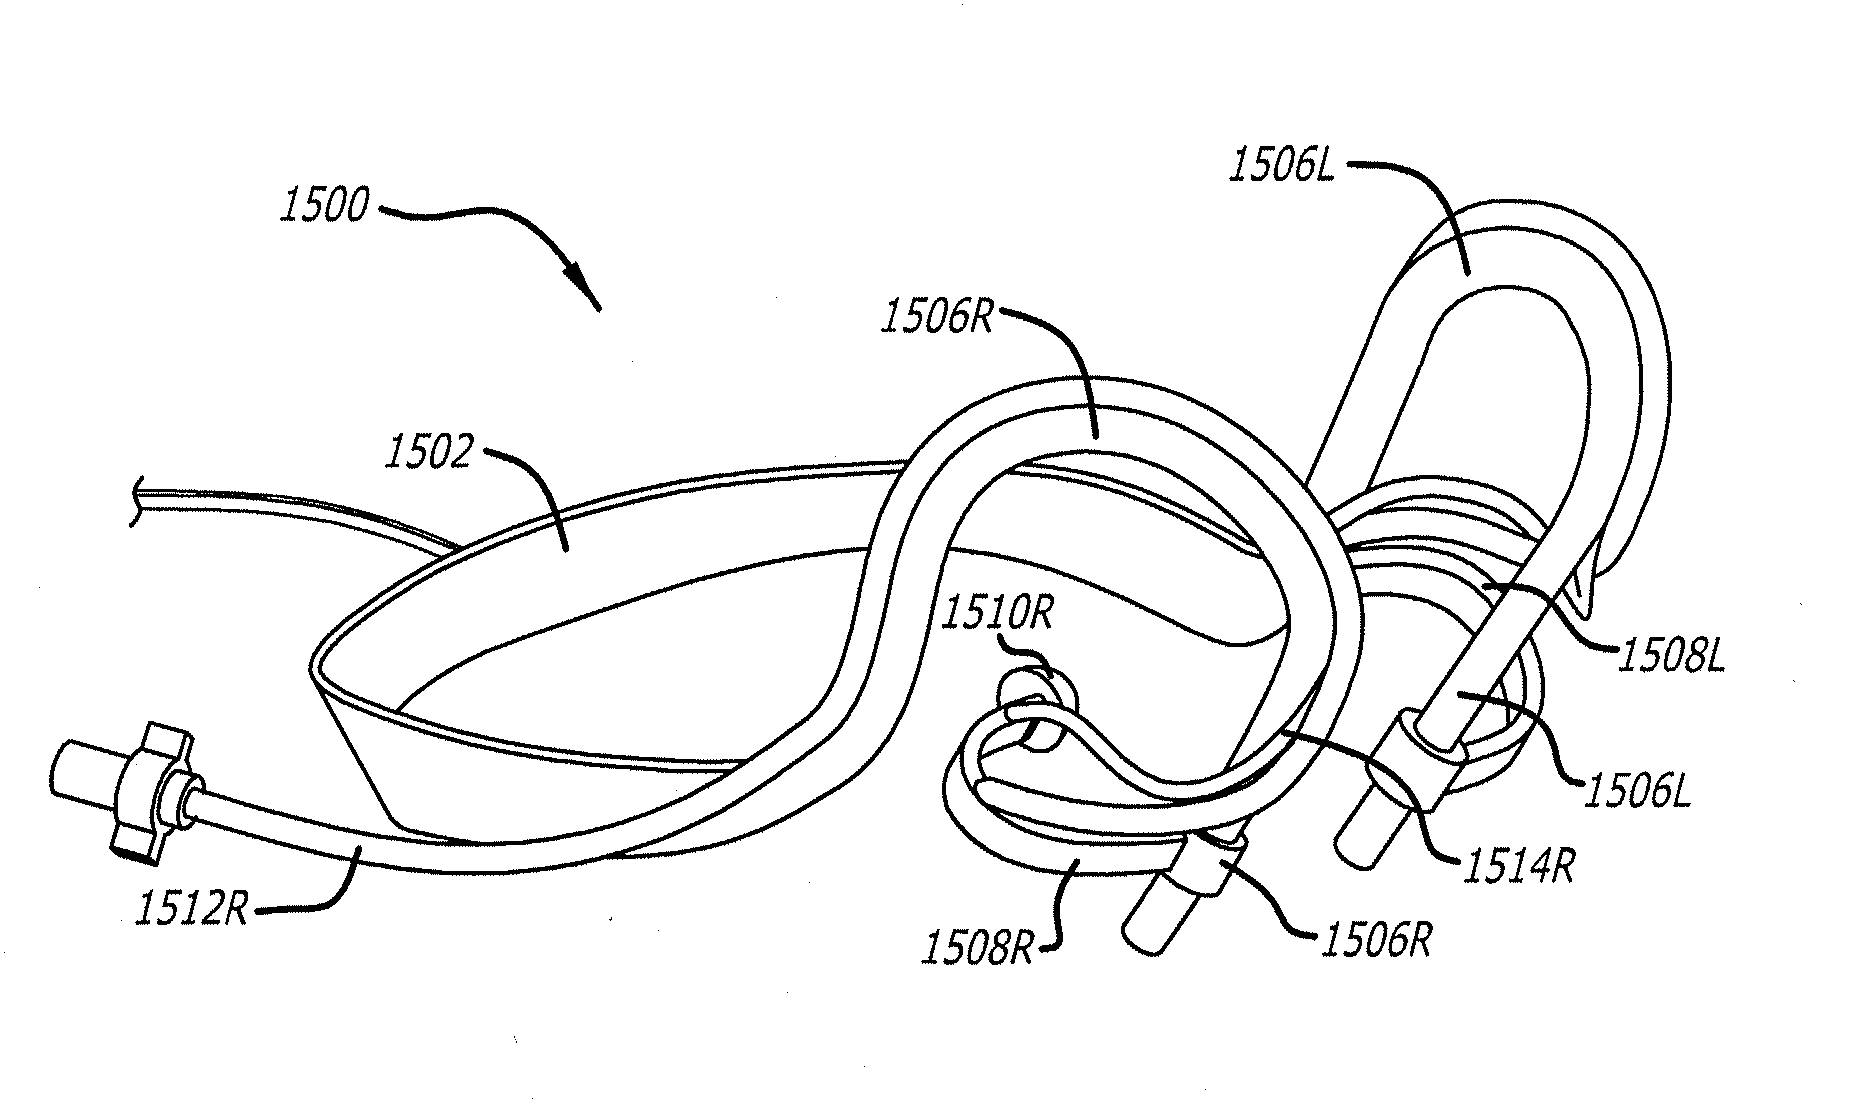 Systems and methods for anesthetizing ear tissue